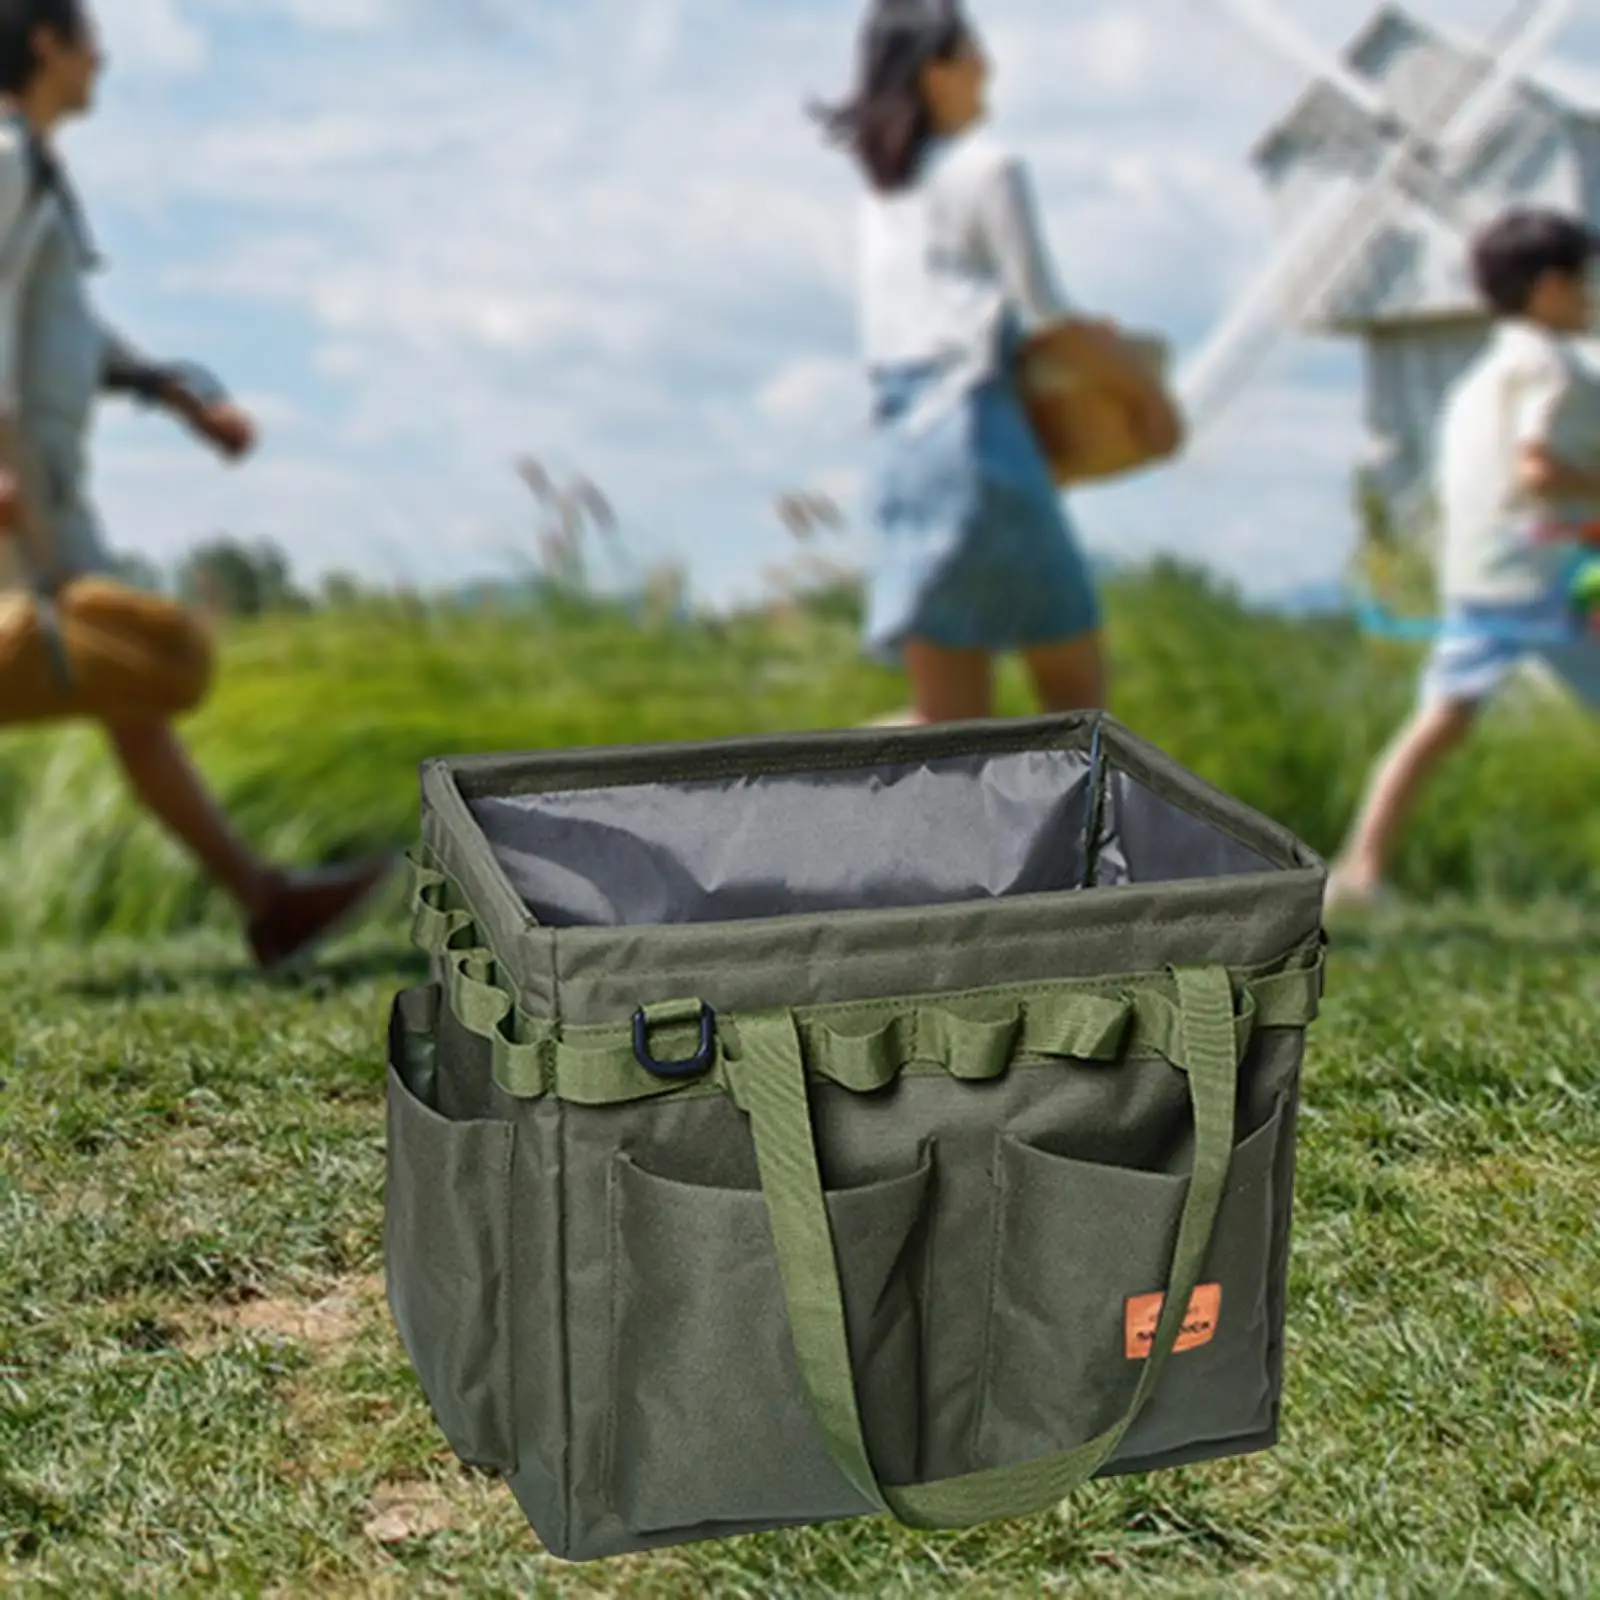 Picnic Cooker Tote Storage Outdoor Camping Bag Garden Tool Bag for Fishing